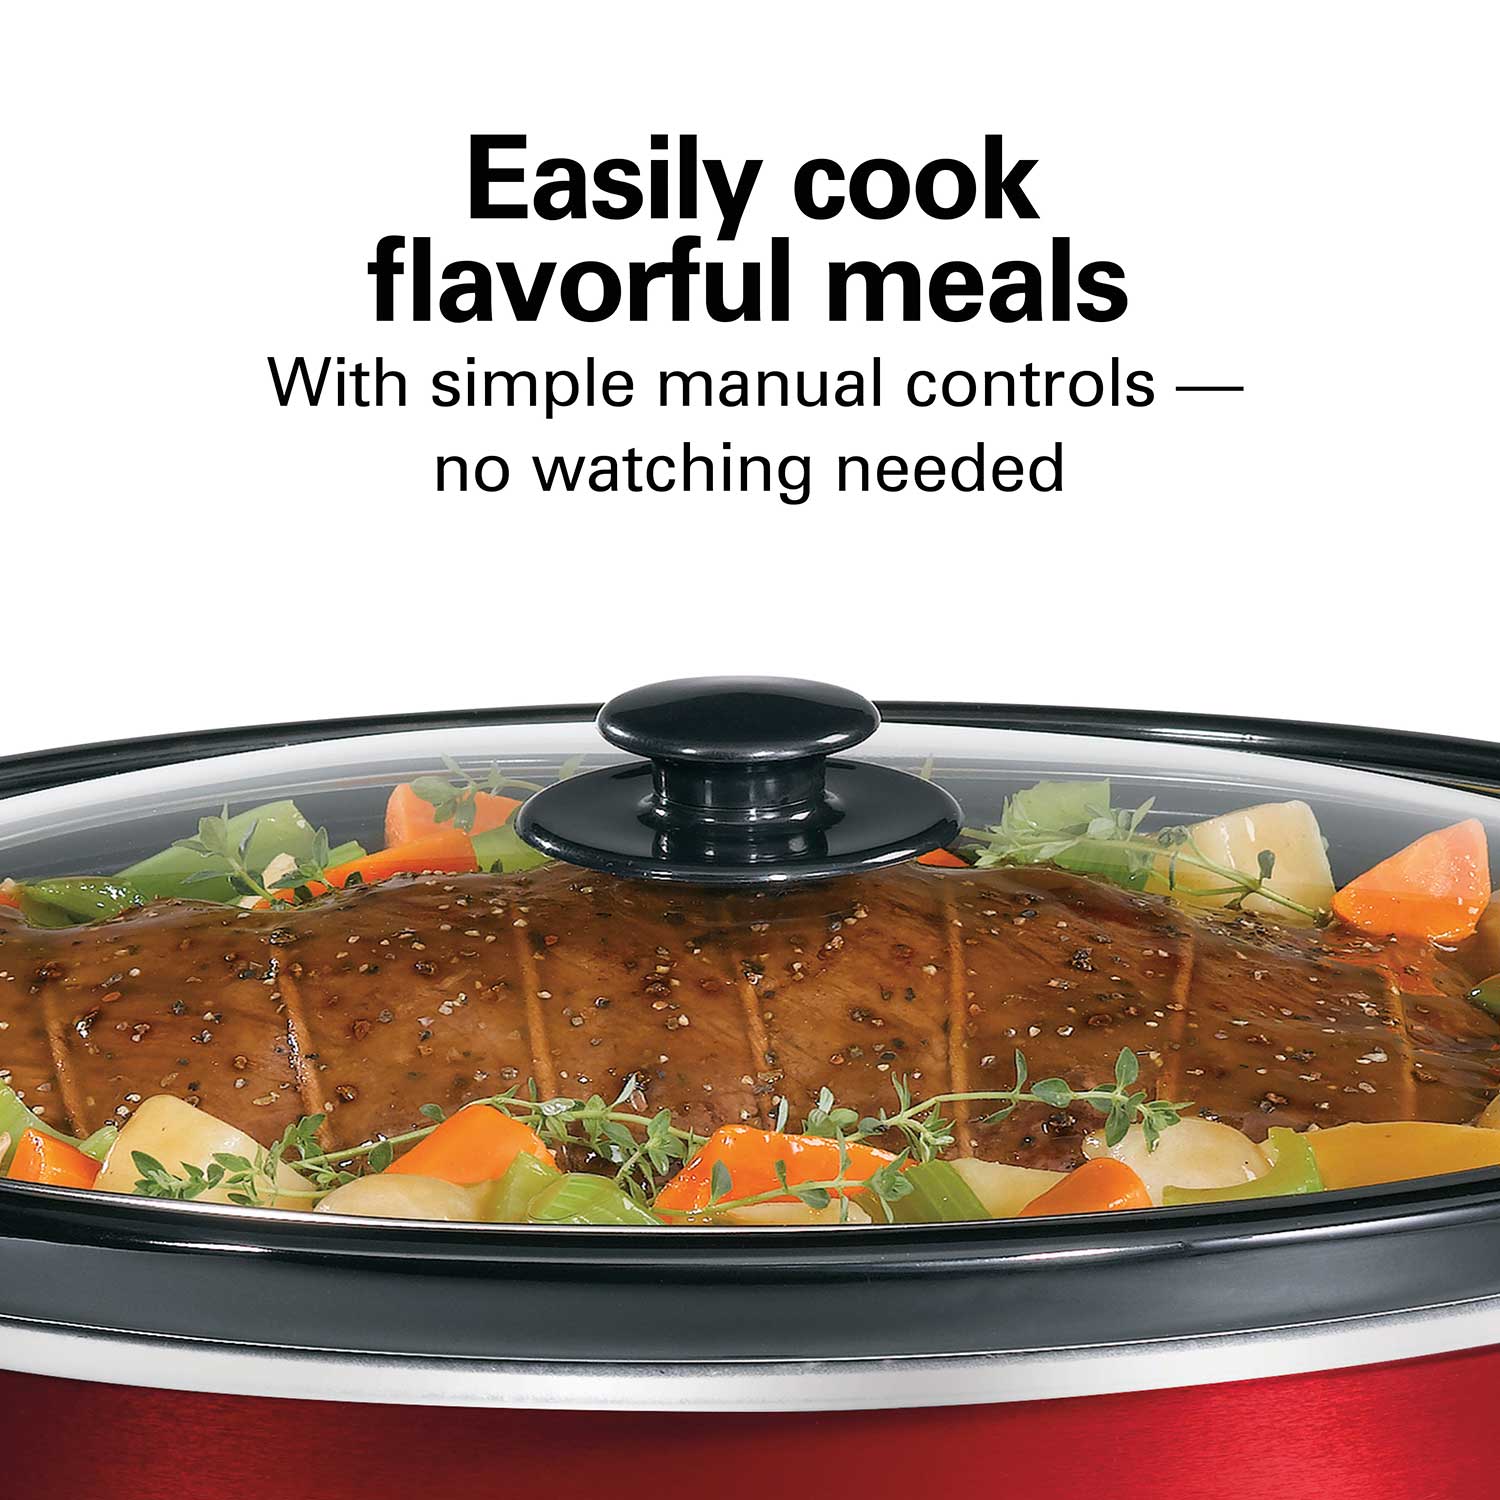 Hamilton Beach 8 Qt. Red Slow Cooker 33184 - The Home Depot